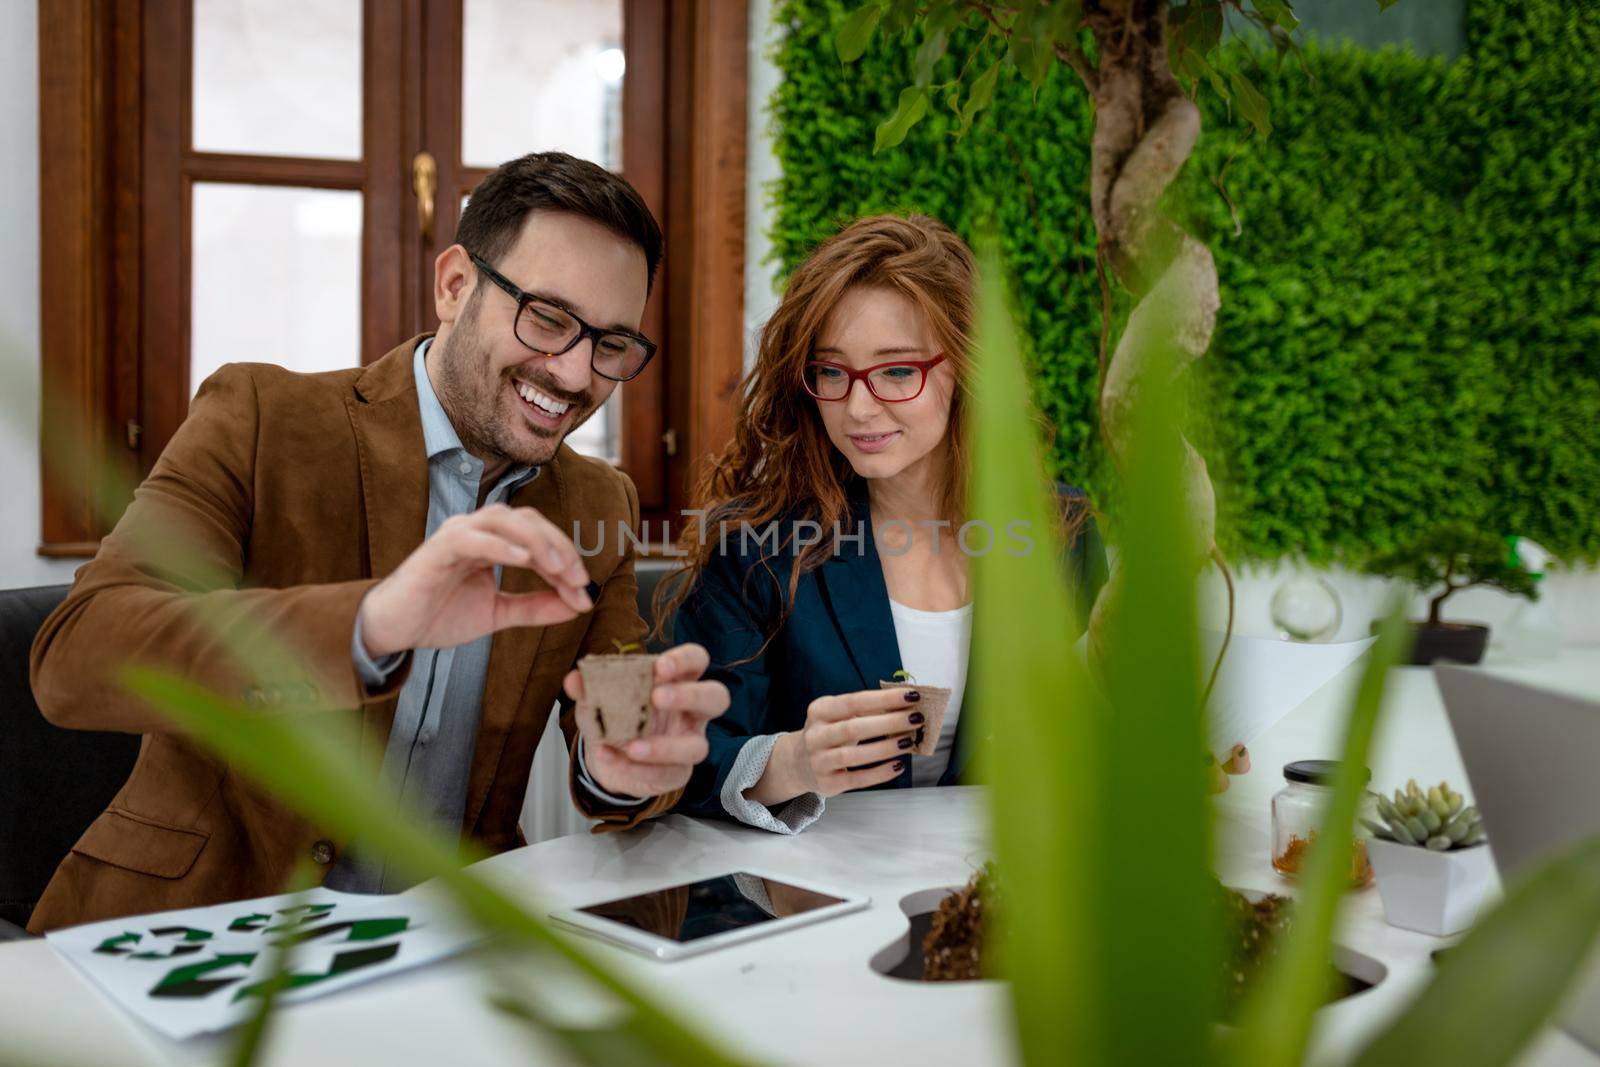 Scientist Examining Samples With Plants by MilanMarkovic78